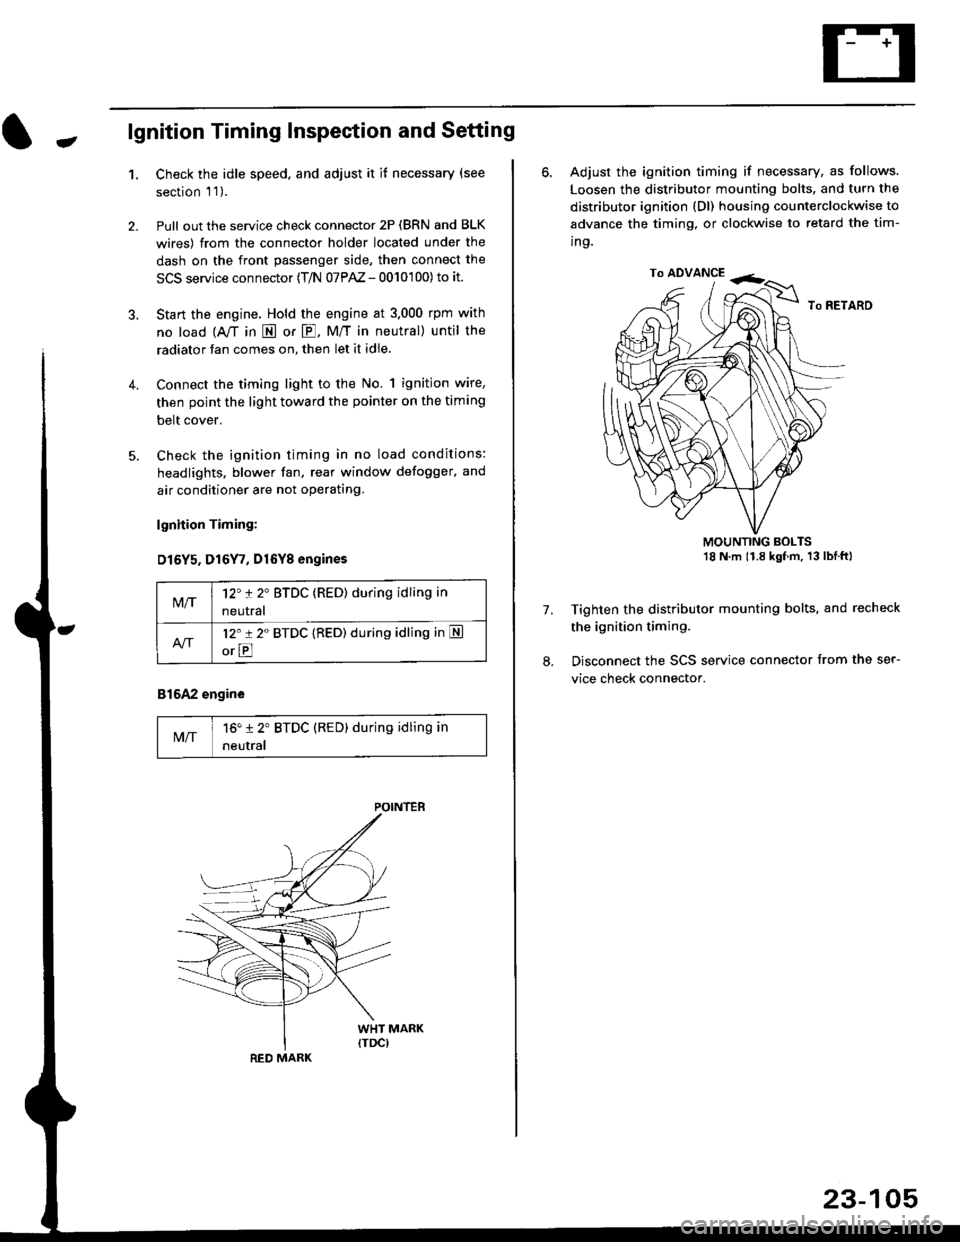 HONDA CIVIC 1997 6.G Owners Manual -lgnition Timing Inspection and Setting
1.Check the idle speed, and adjust it it necessary (see
section l 1 ).
Pull out the service check connector 2P (BRN and BLK
wires) from the connector holder l